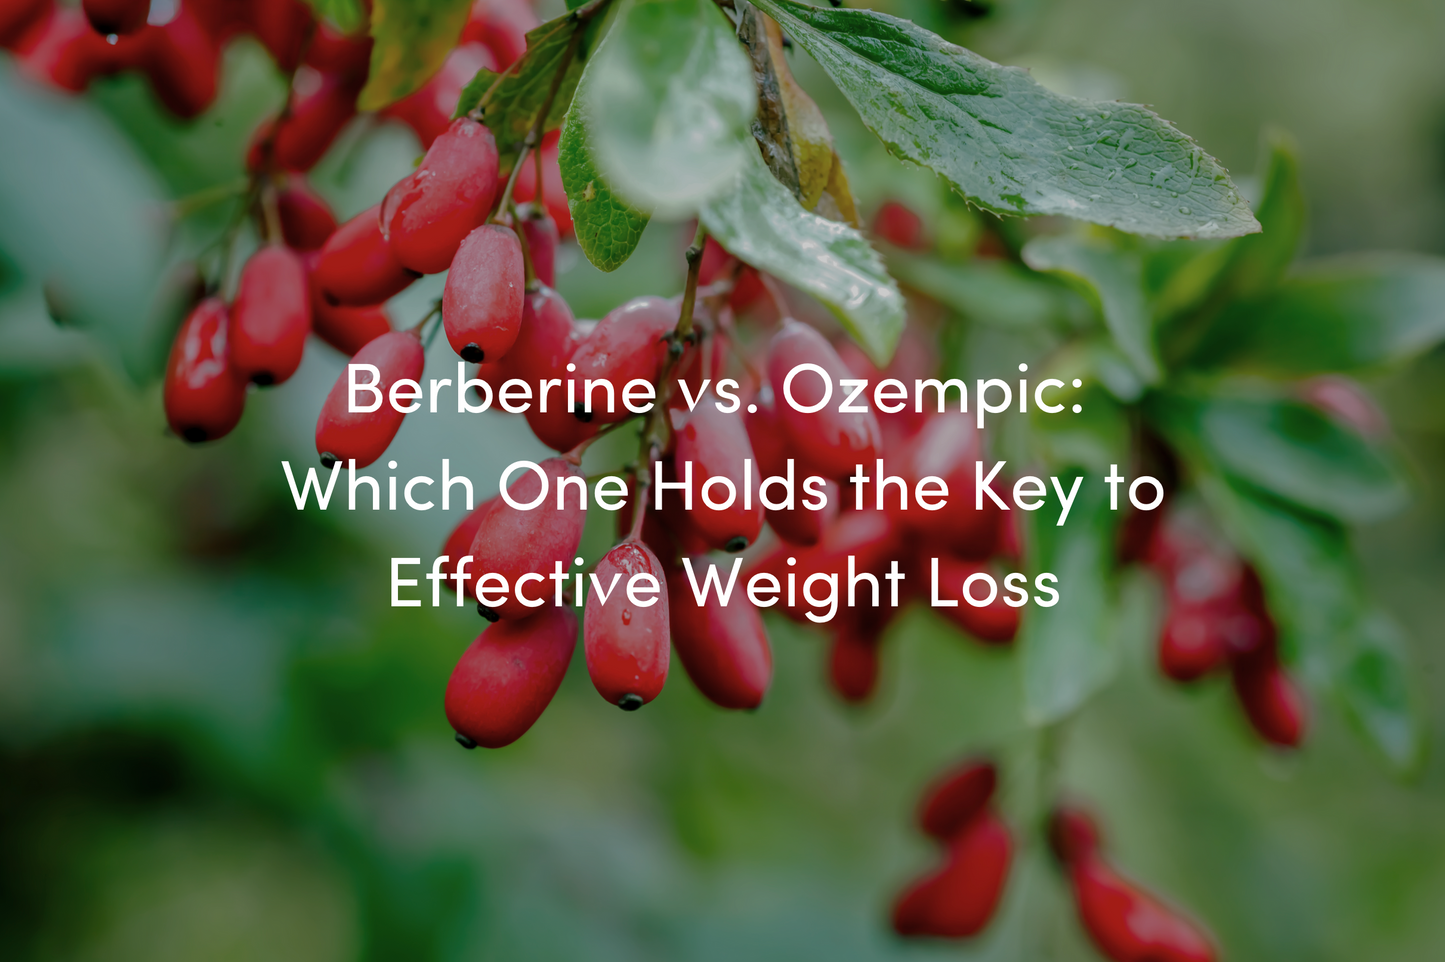 Berberine vs. Ozempic: Which one holds the key to effective weight loss